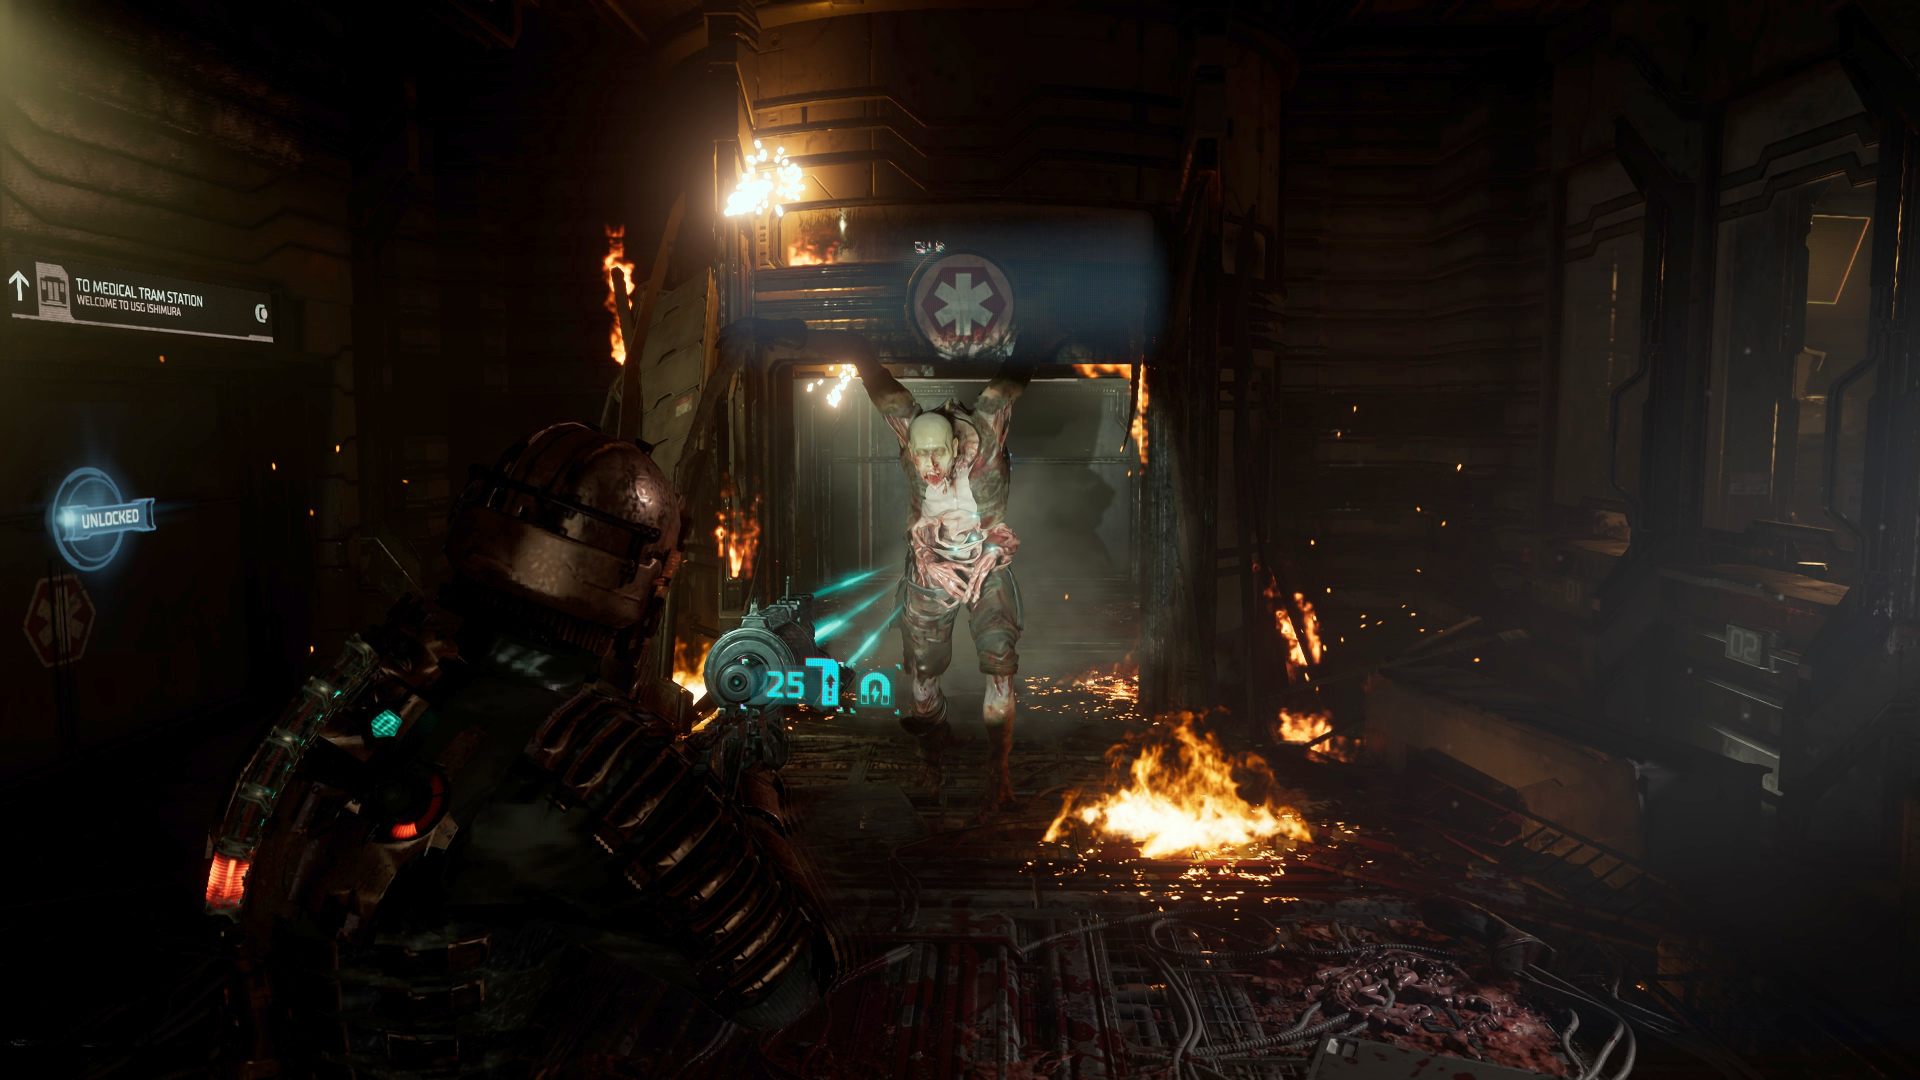 Dead Space Remake Review: Isaac Clark targeting approaching Necromorph with rifle